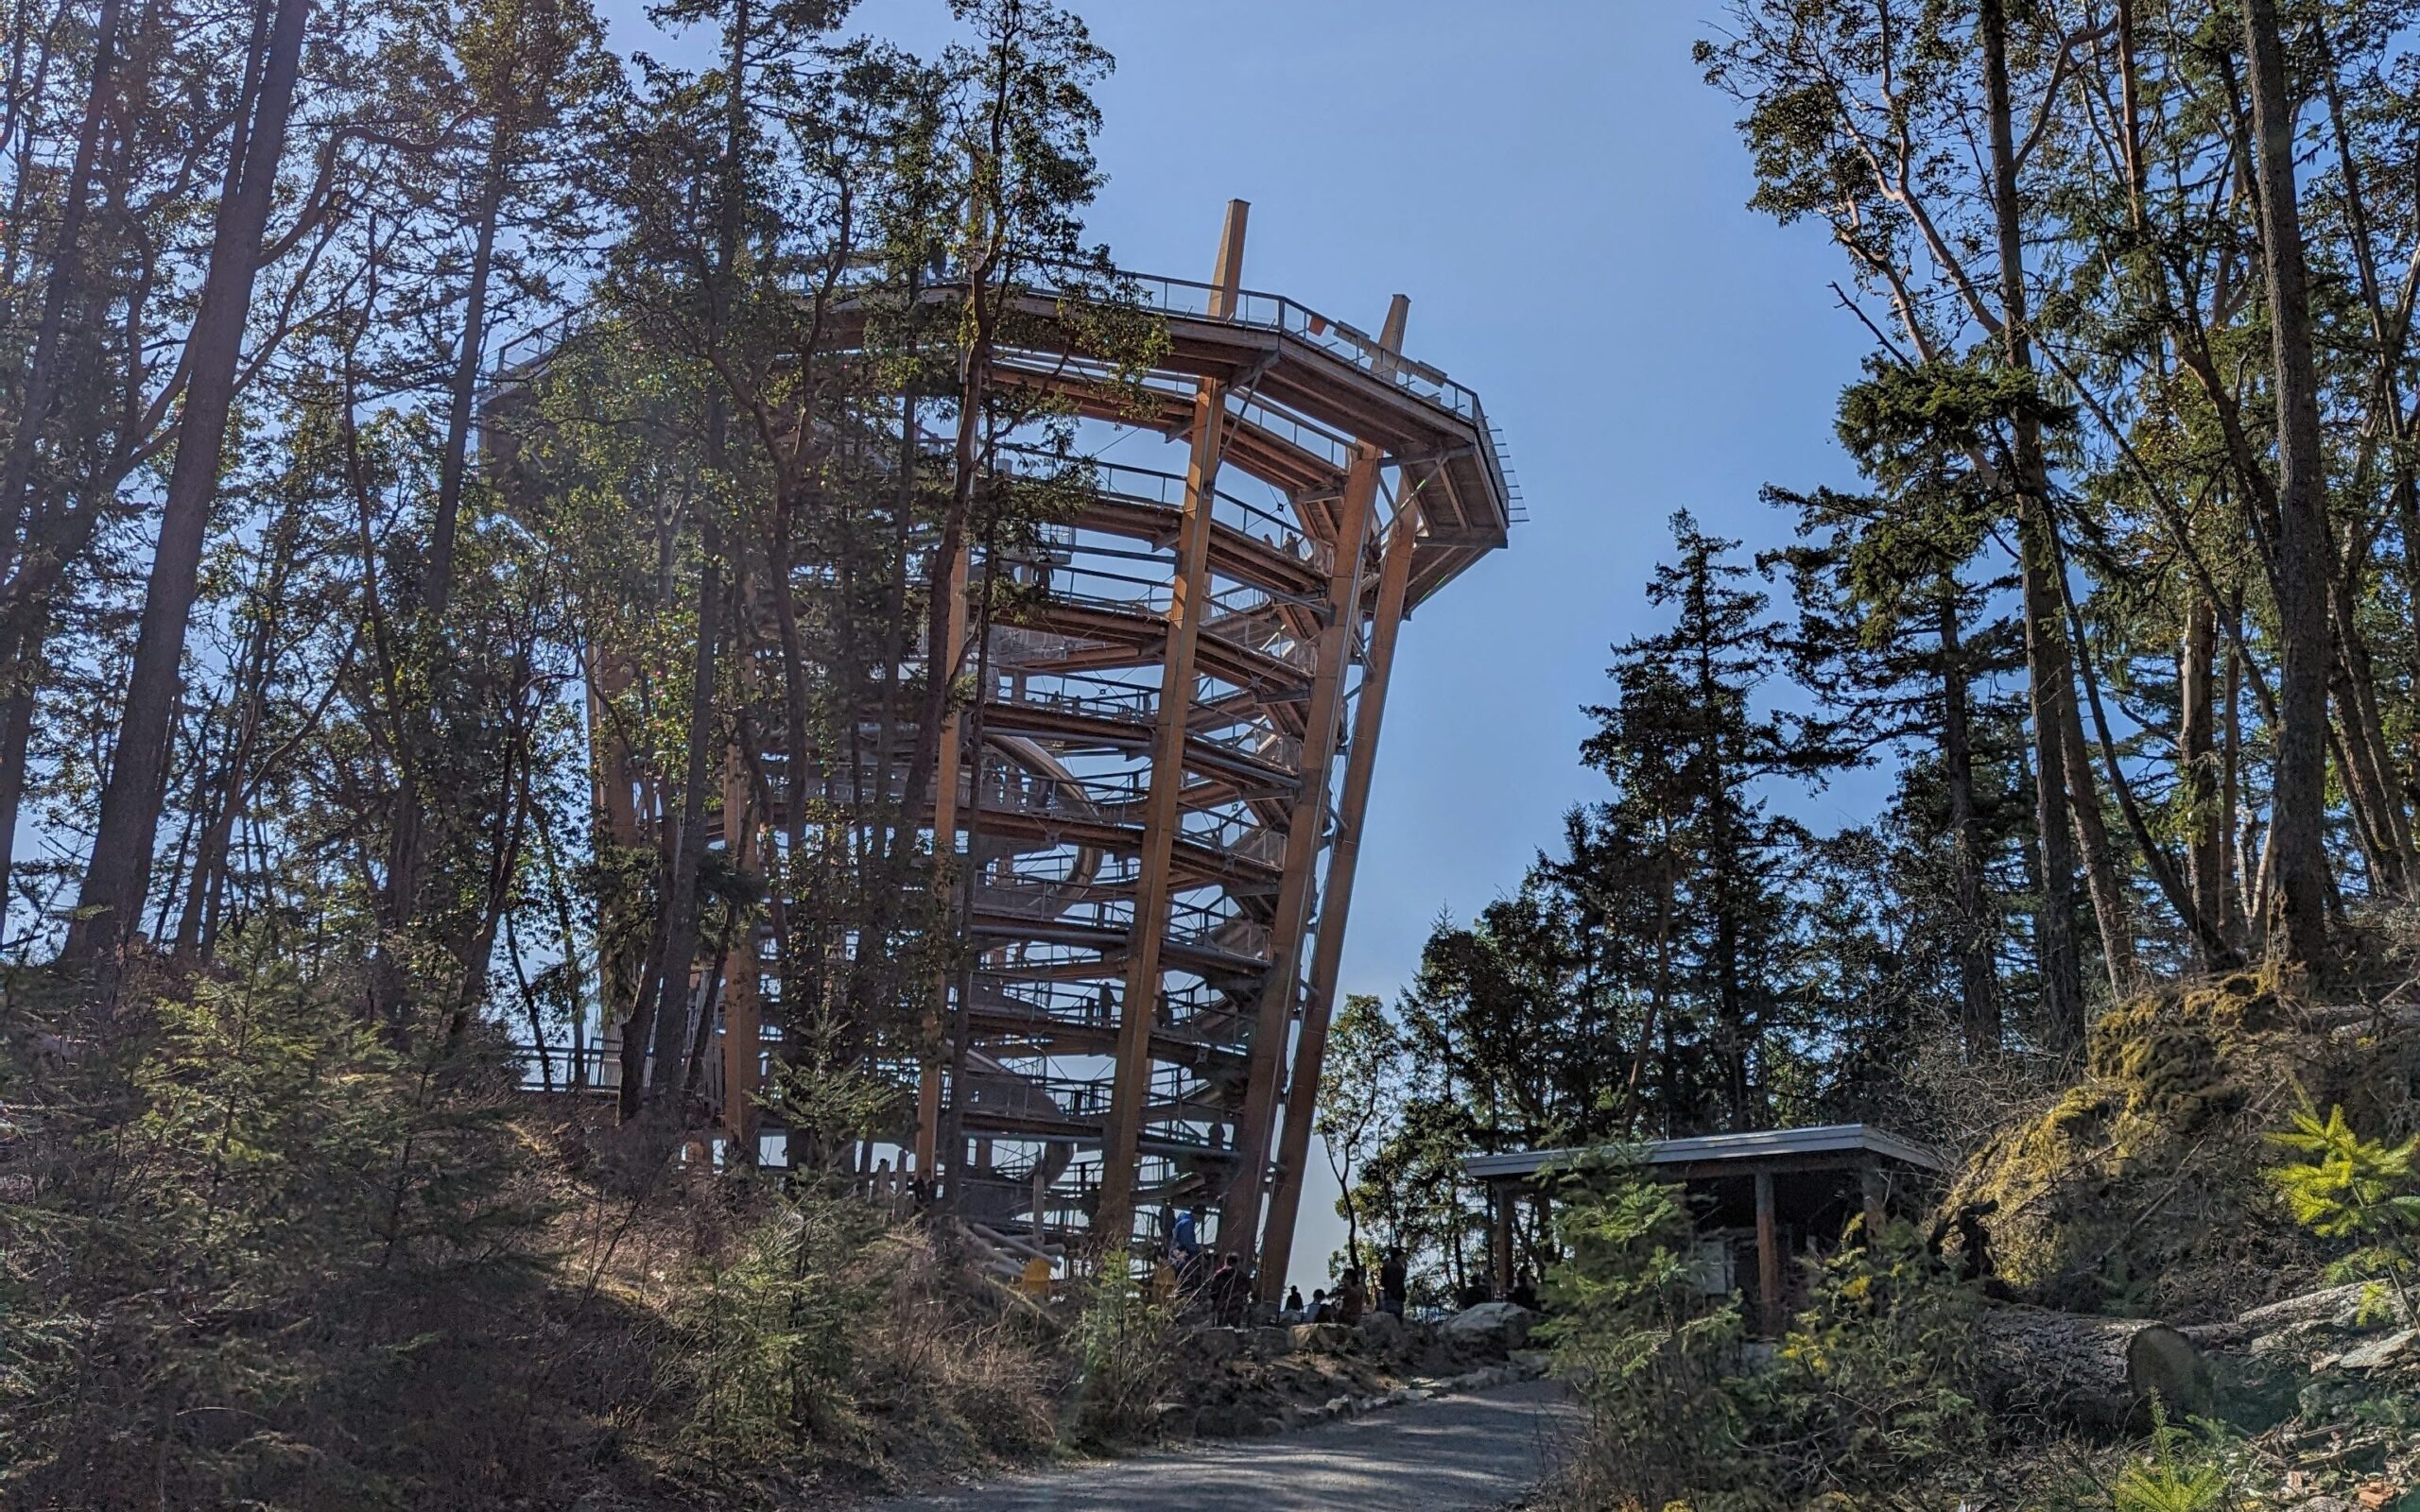 Malahat SkyWalk Review: What You Need to Know Before You Go